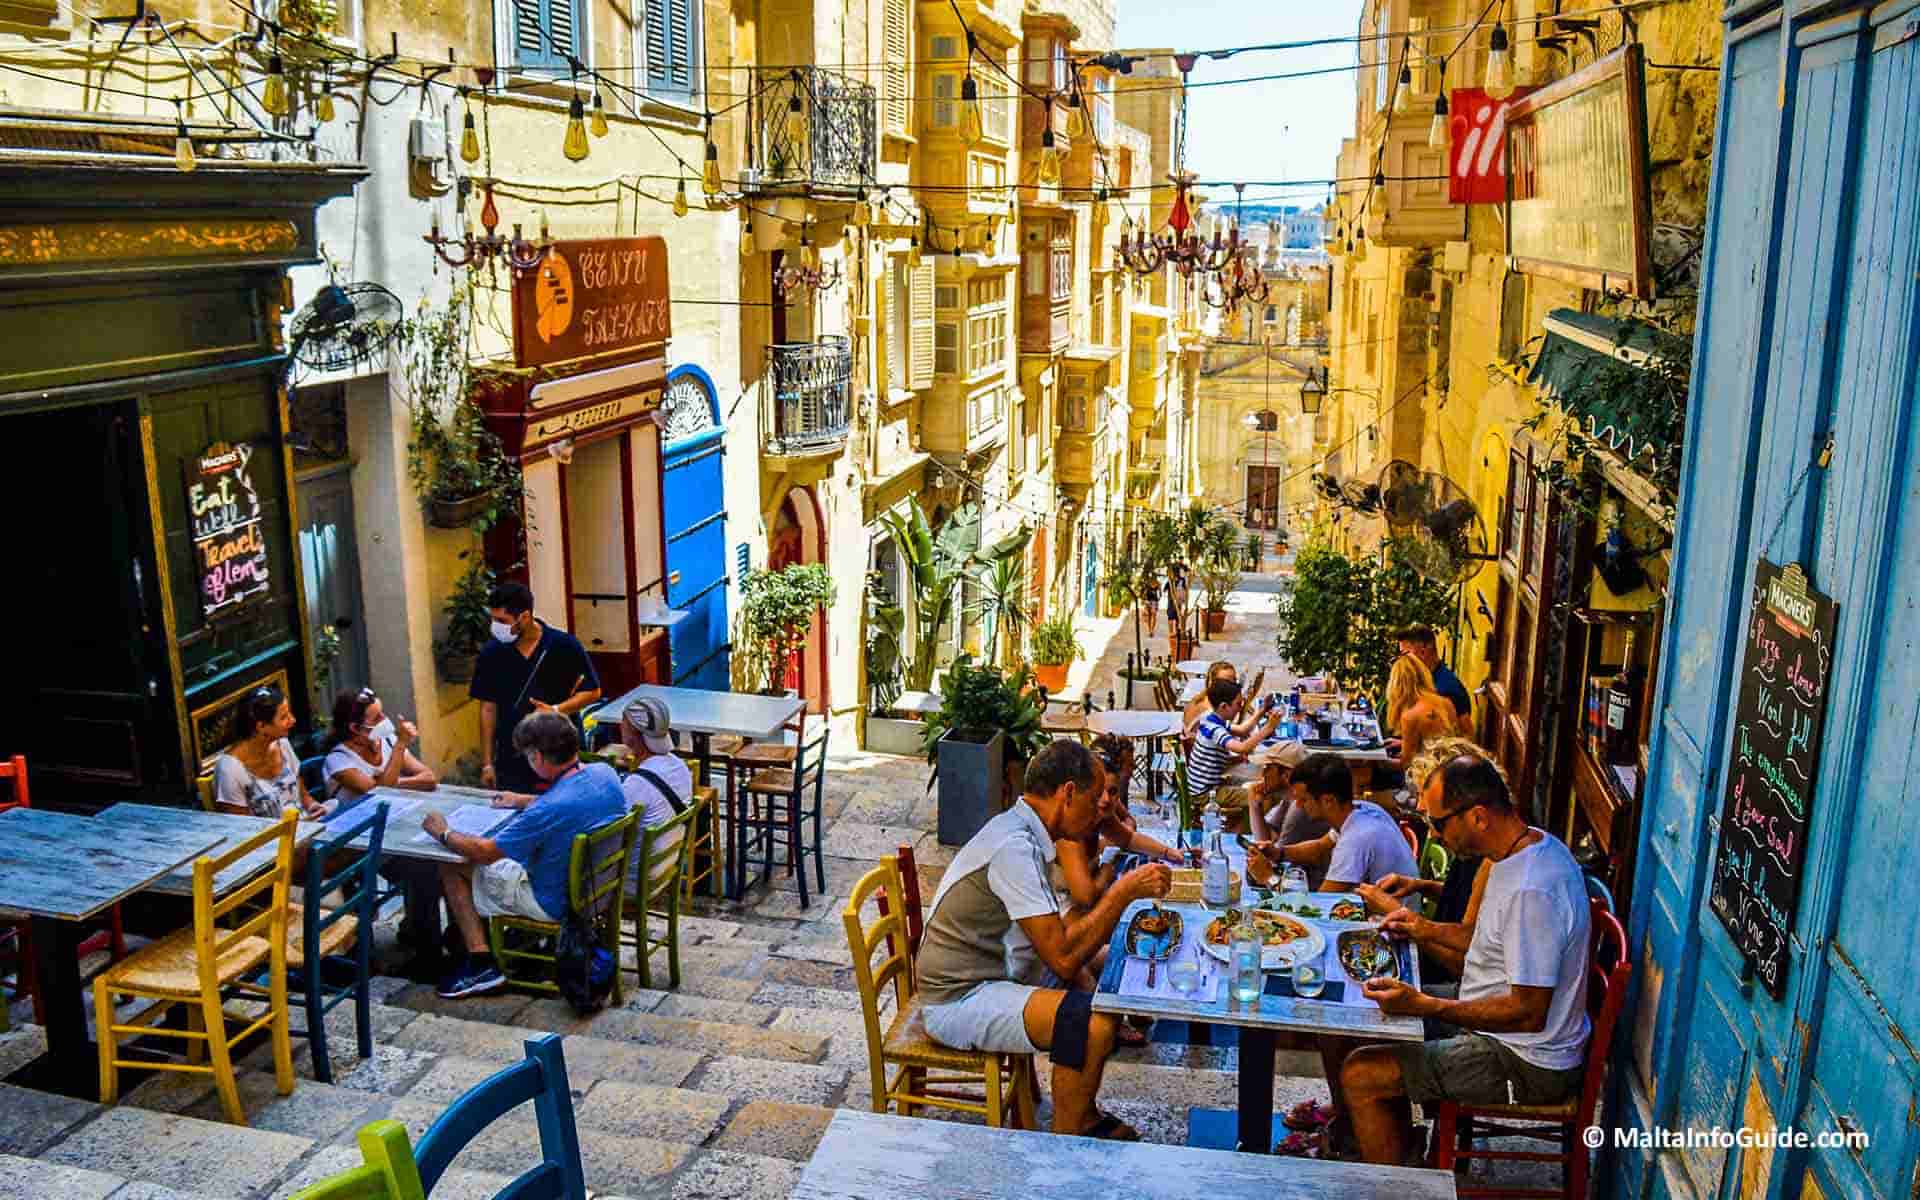 People having lunch at one of the restaurants in Valletta.